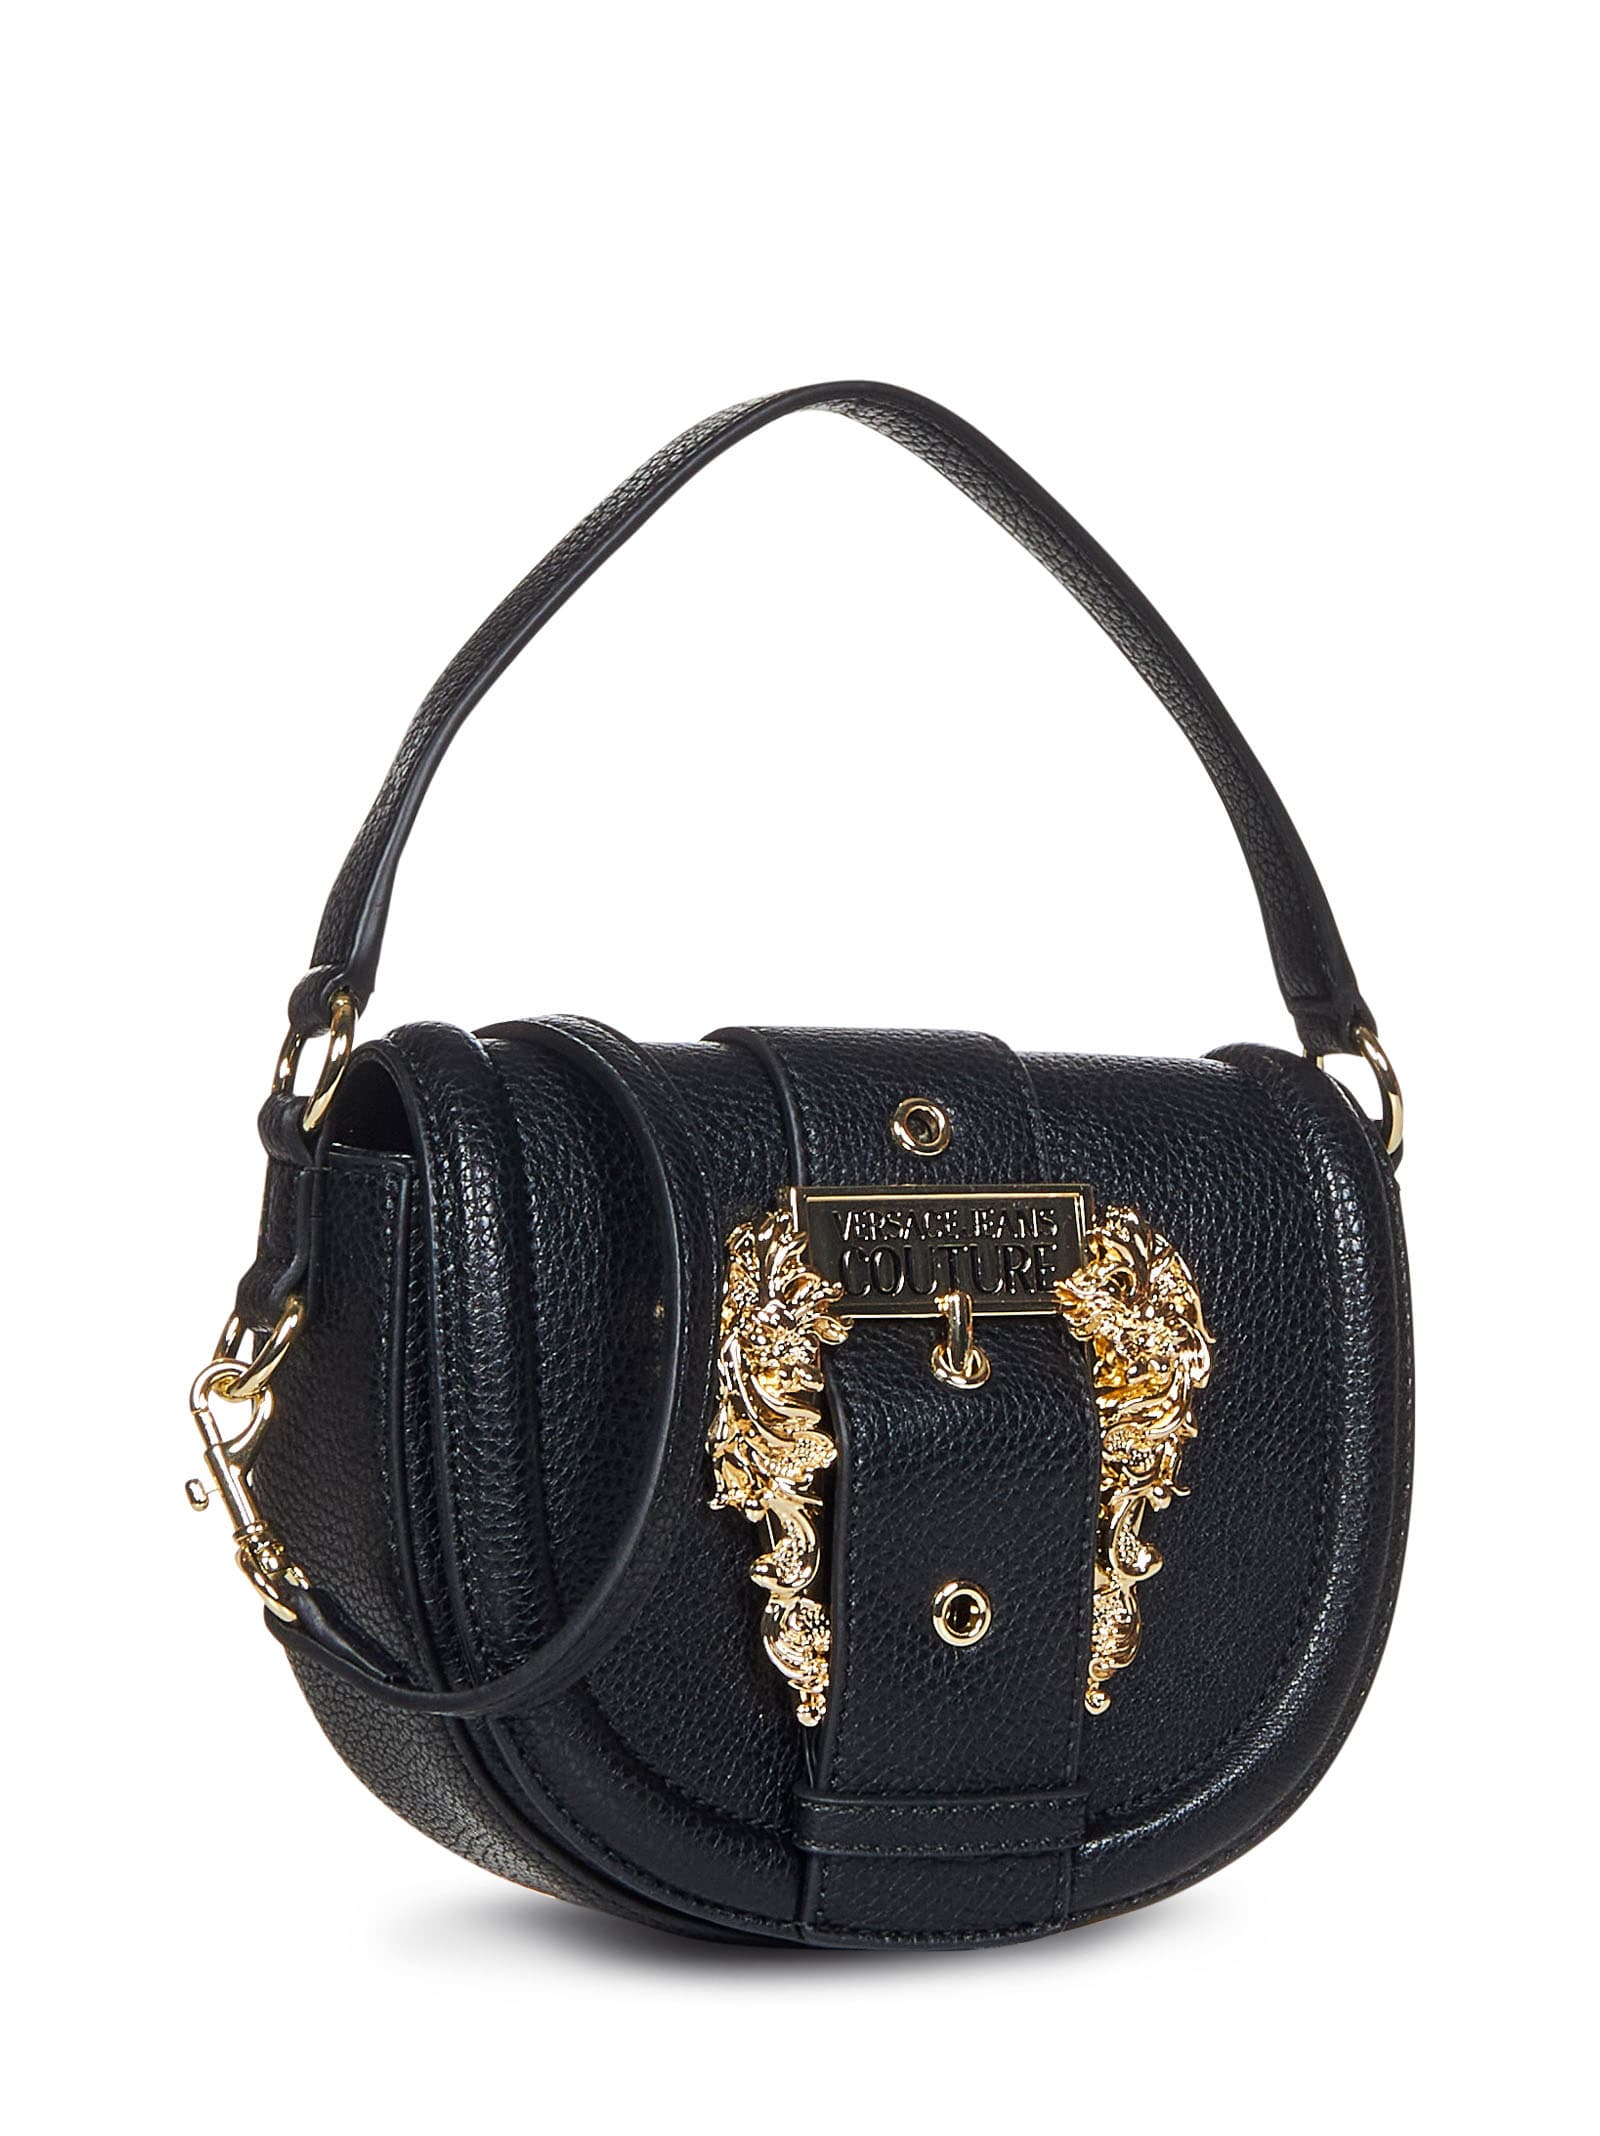 Shop Versace Jeans Couture Tote In Nero